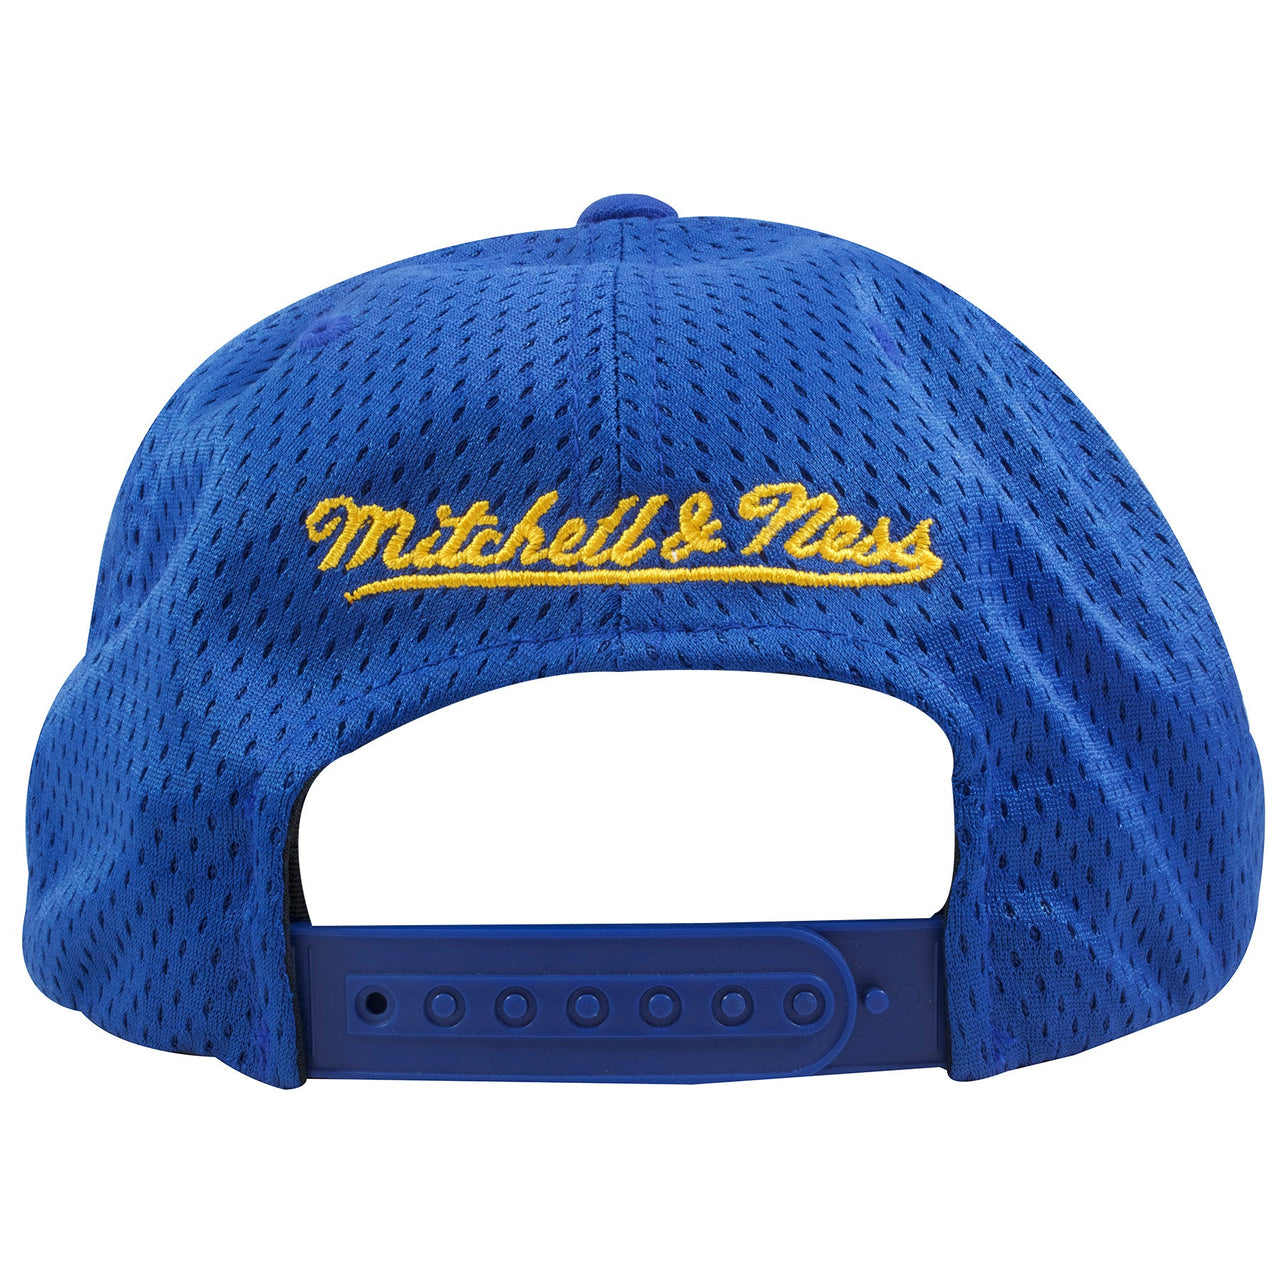 Golden State Warriors Royal Blue Mesh Mitchell and Ness Snapback Hat